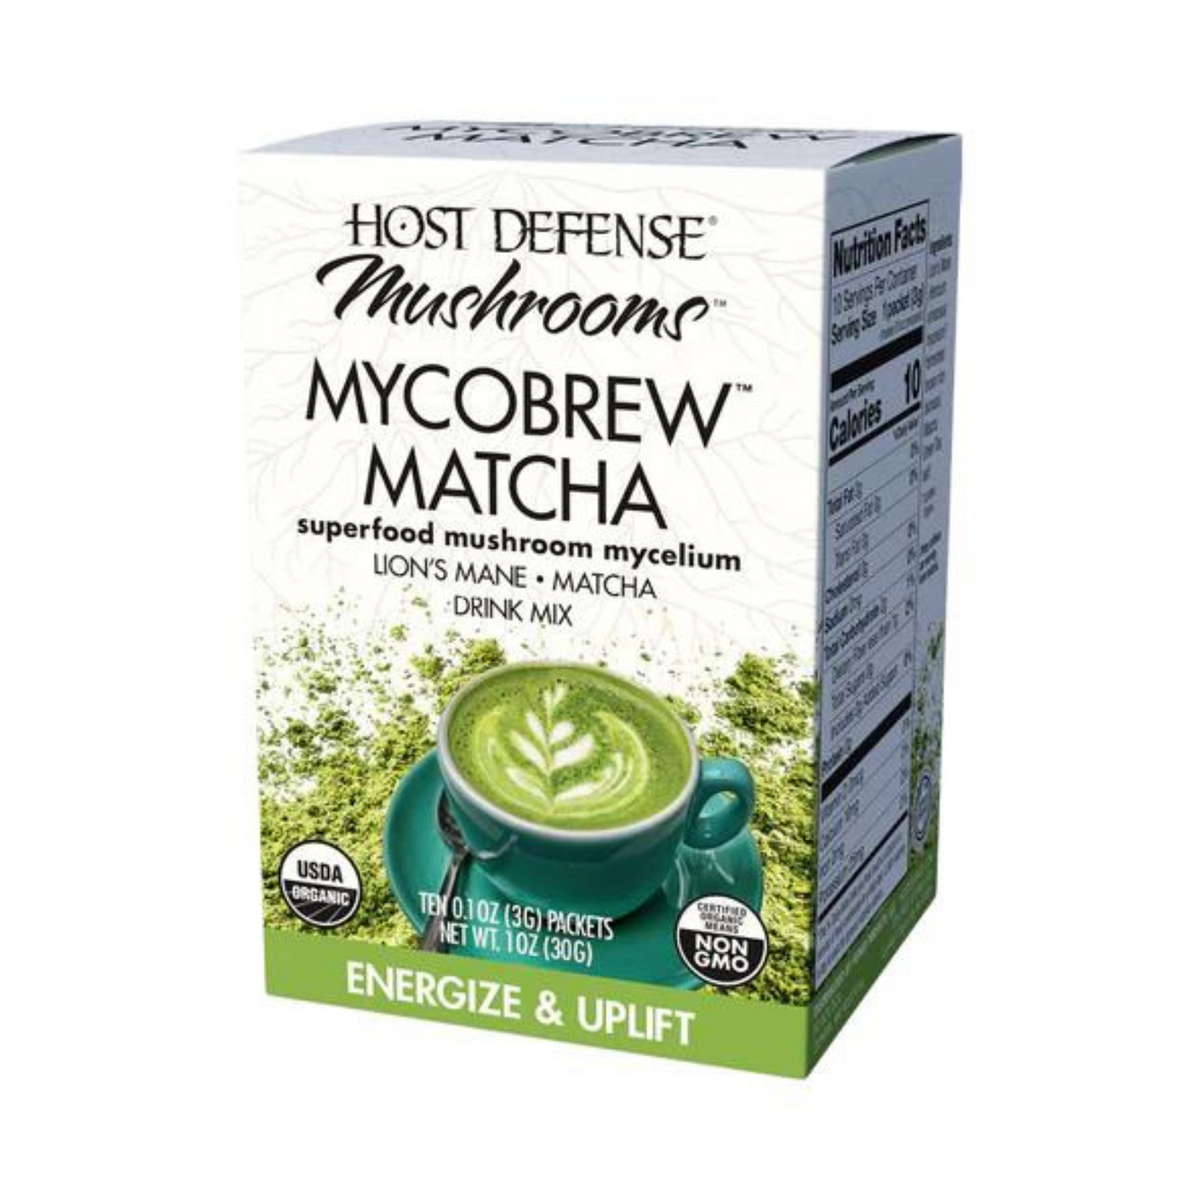 Primary Image of Host Defense MycoBrew Matcha Packets (10 count)